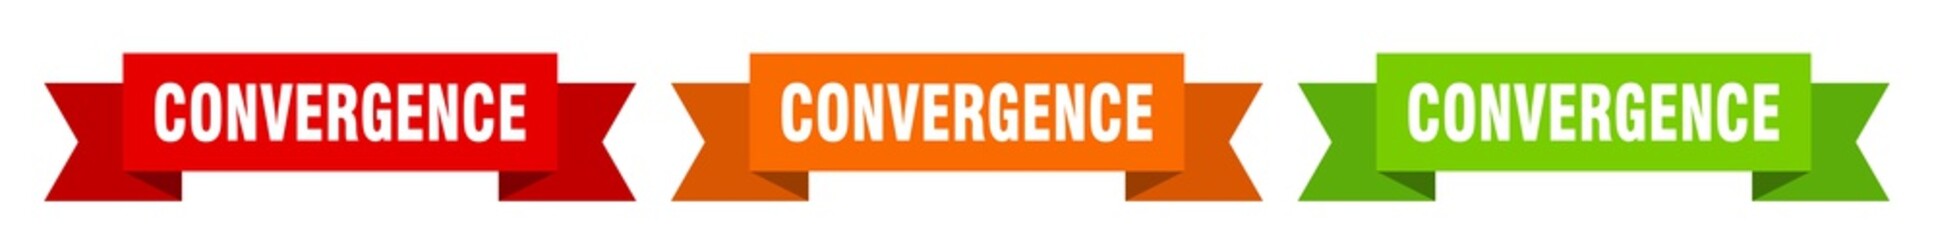 convergence ribbon. convergence isolated paper sign. banner